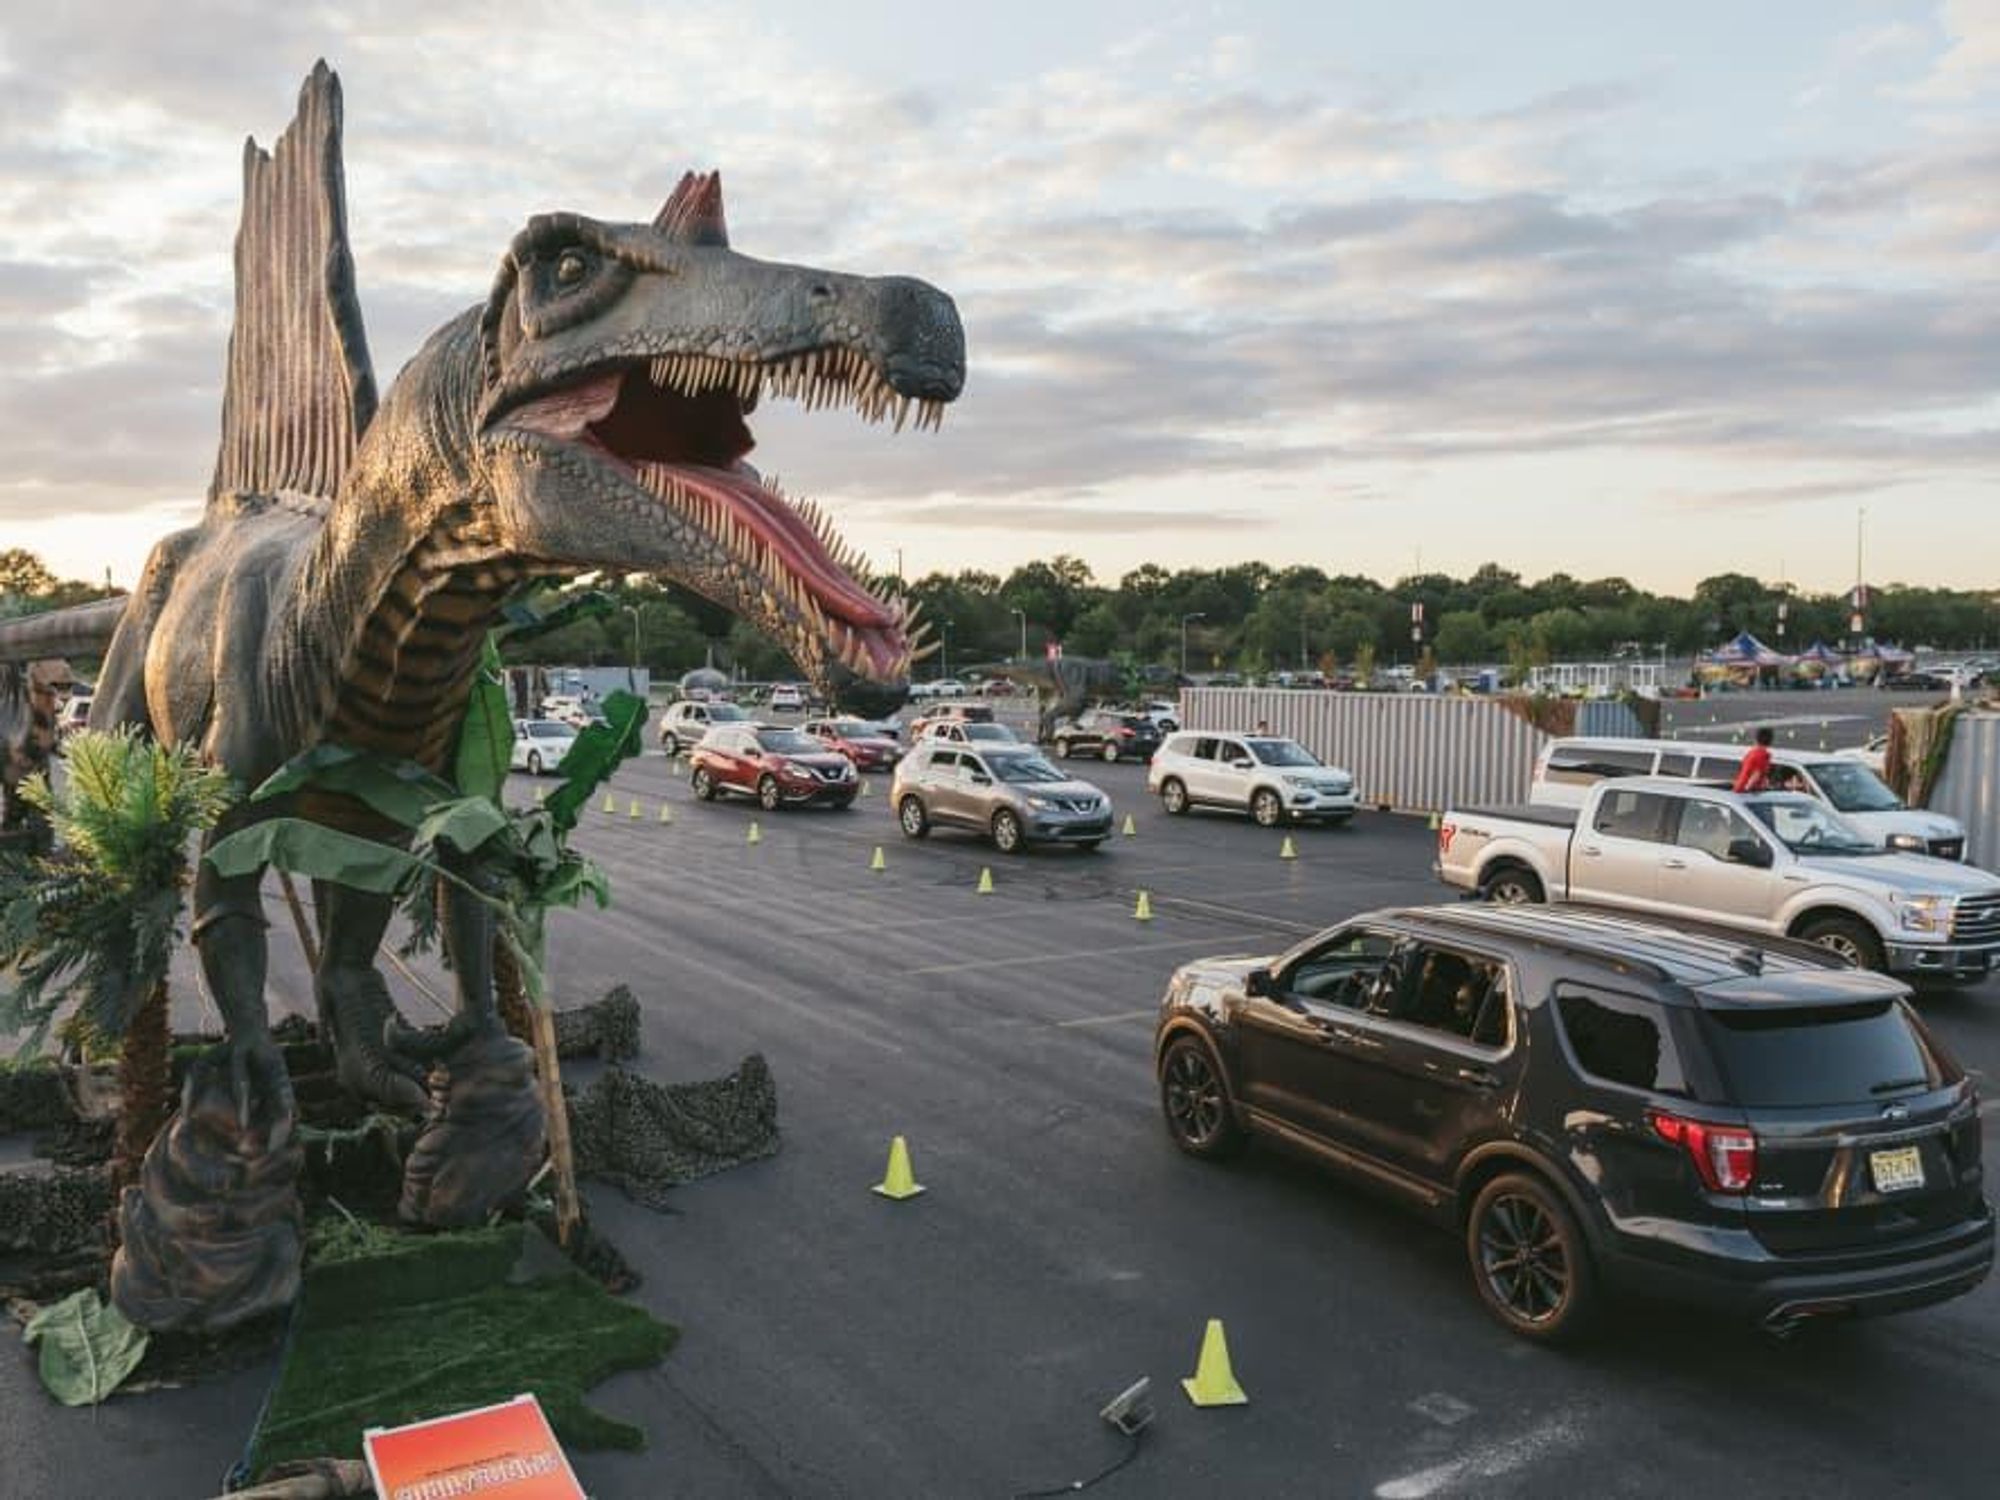 Drive-through dinosaurs invade Austin with realistic roars and more -  CultureMap Austin